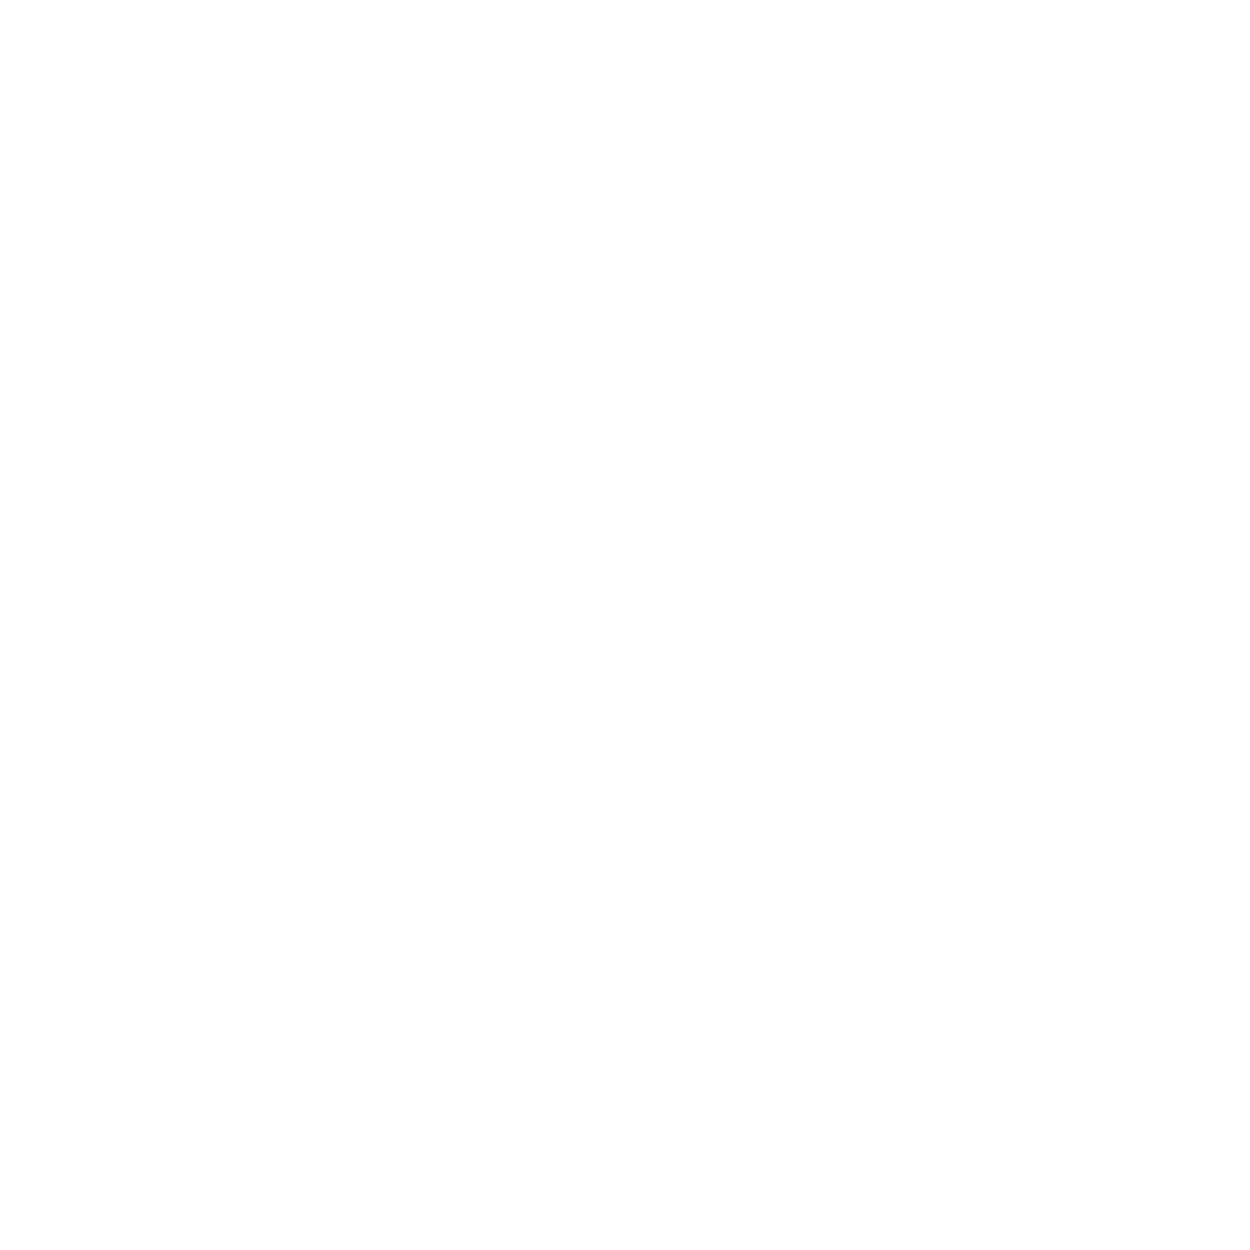 instagtramicon